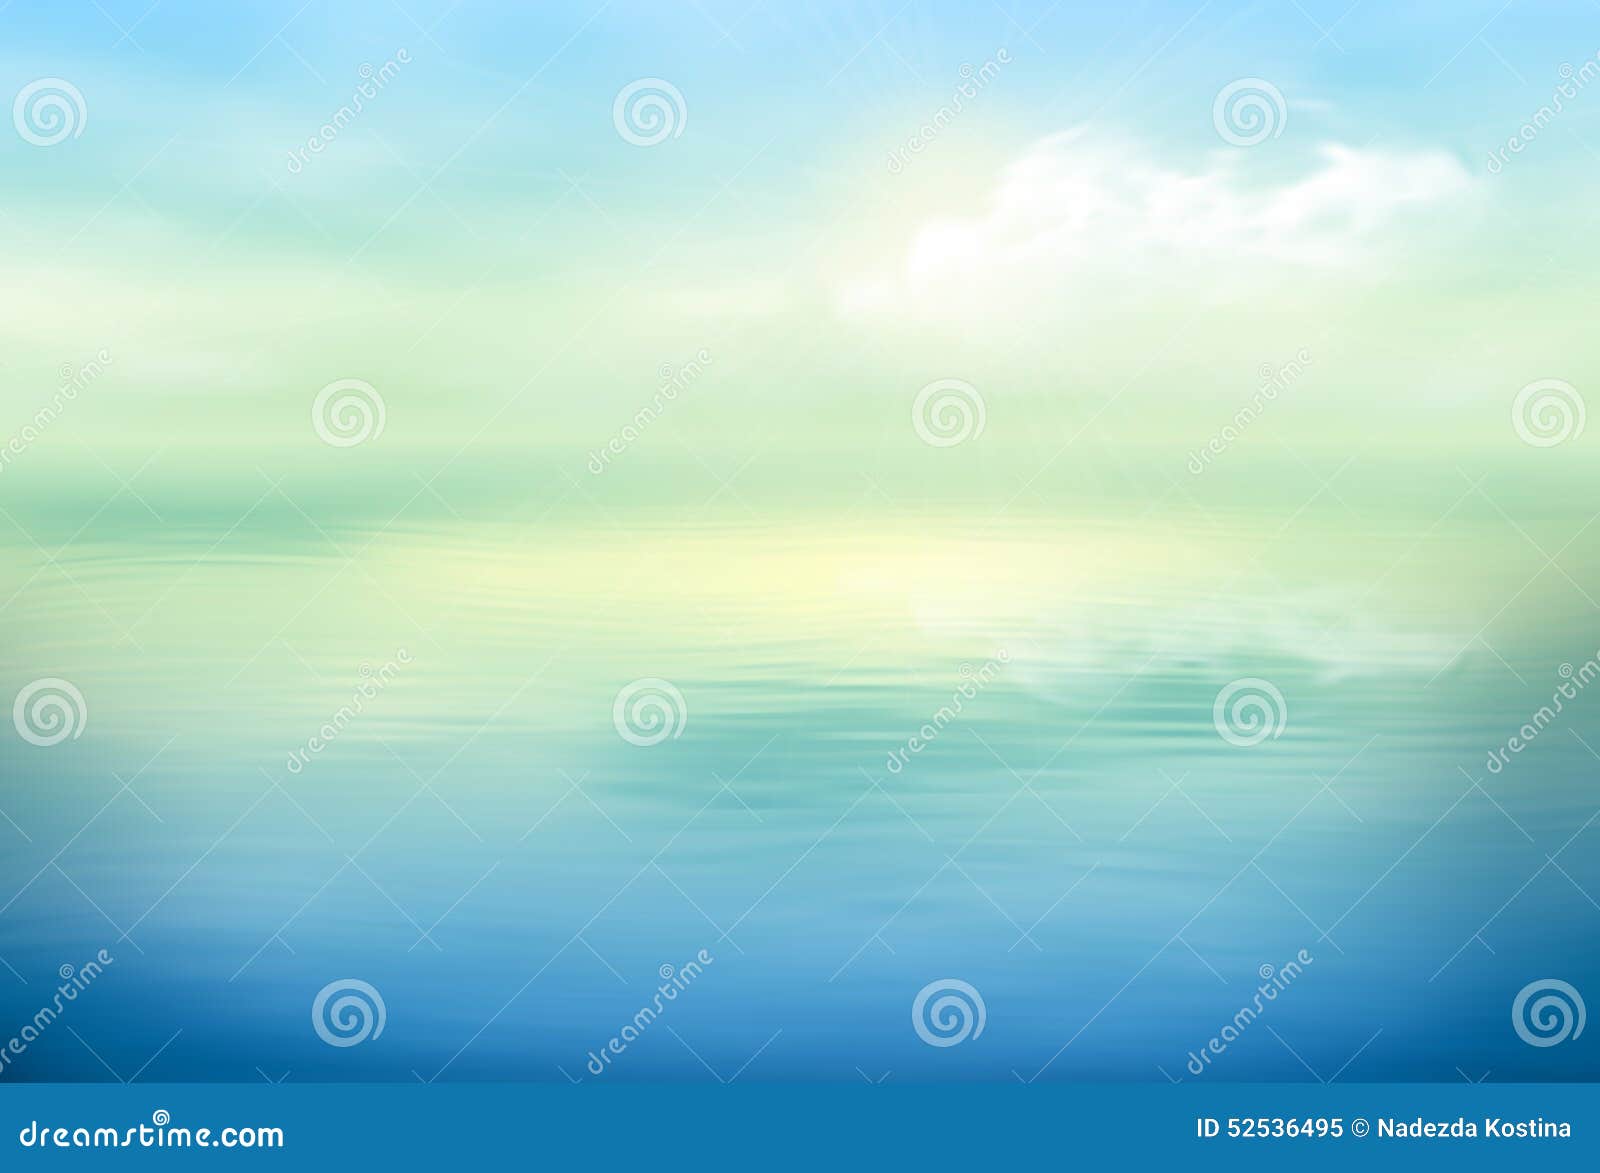 water  background calm clear